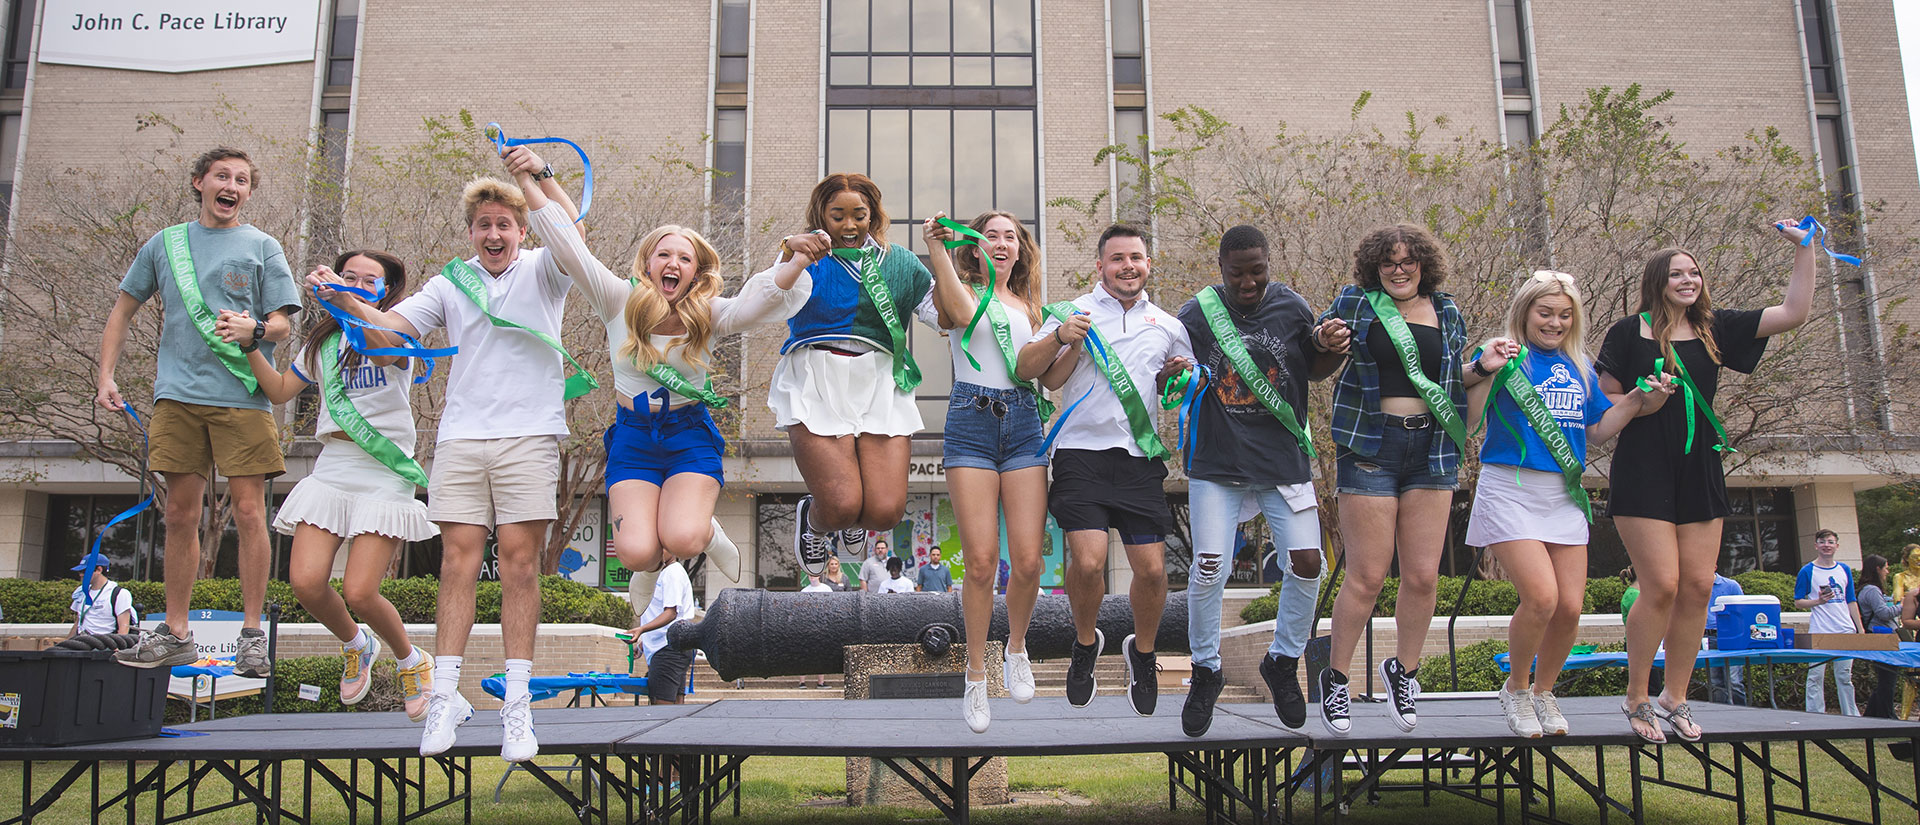 Students with Homecoming Court sashes jump in unison on Cannon Green